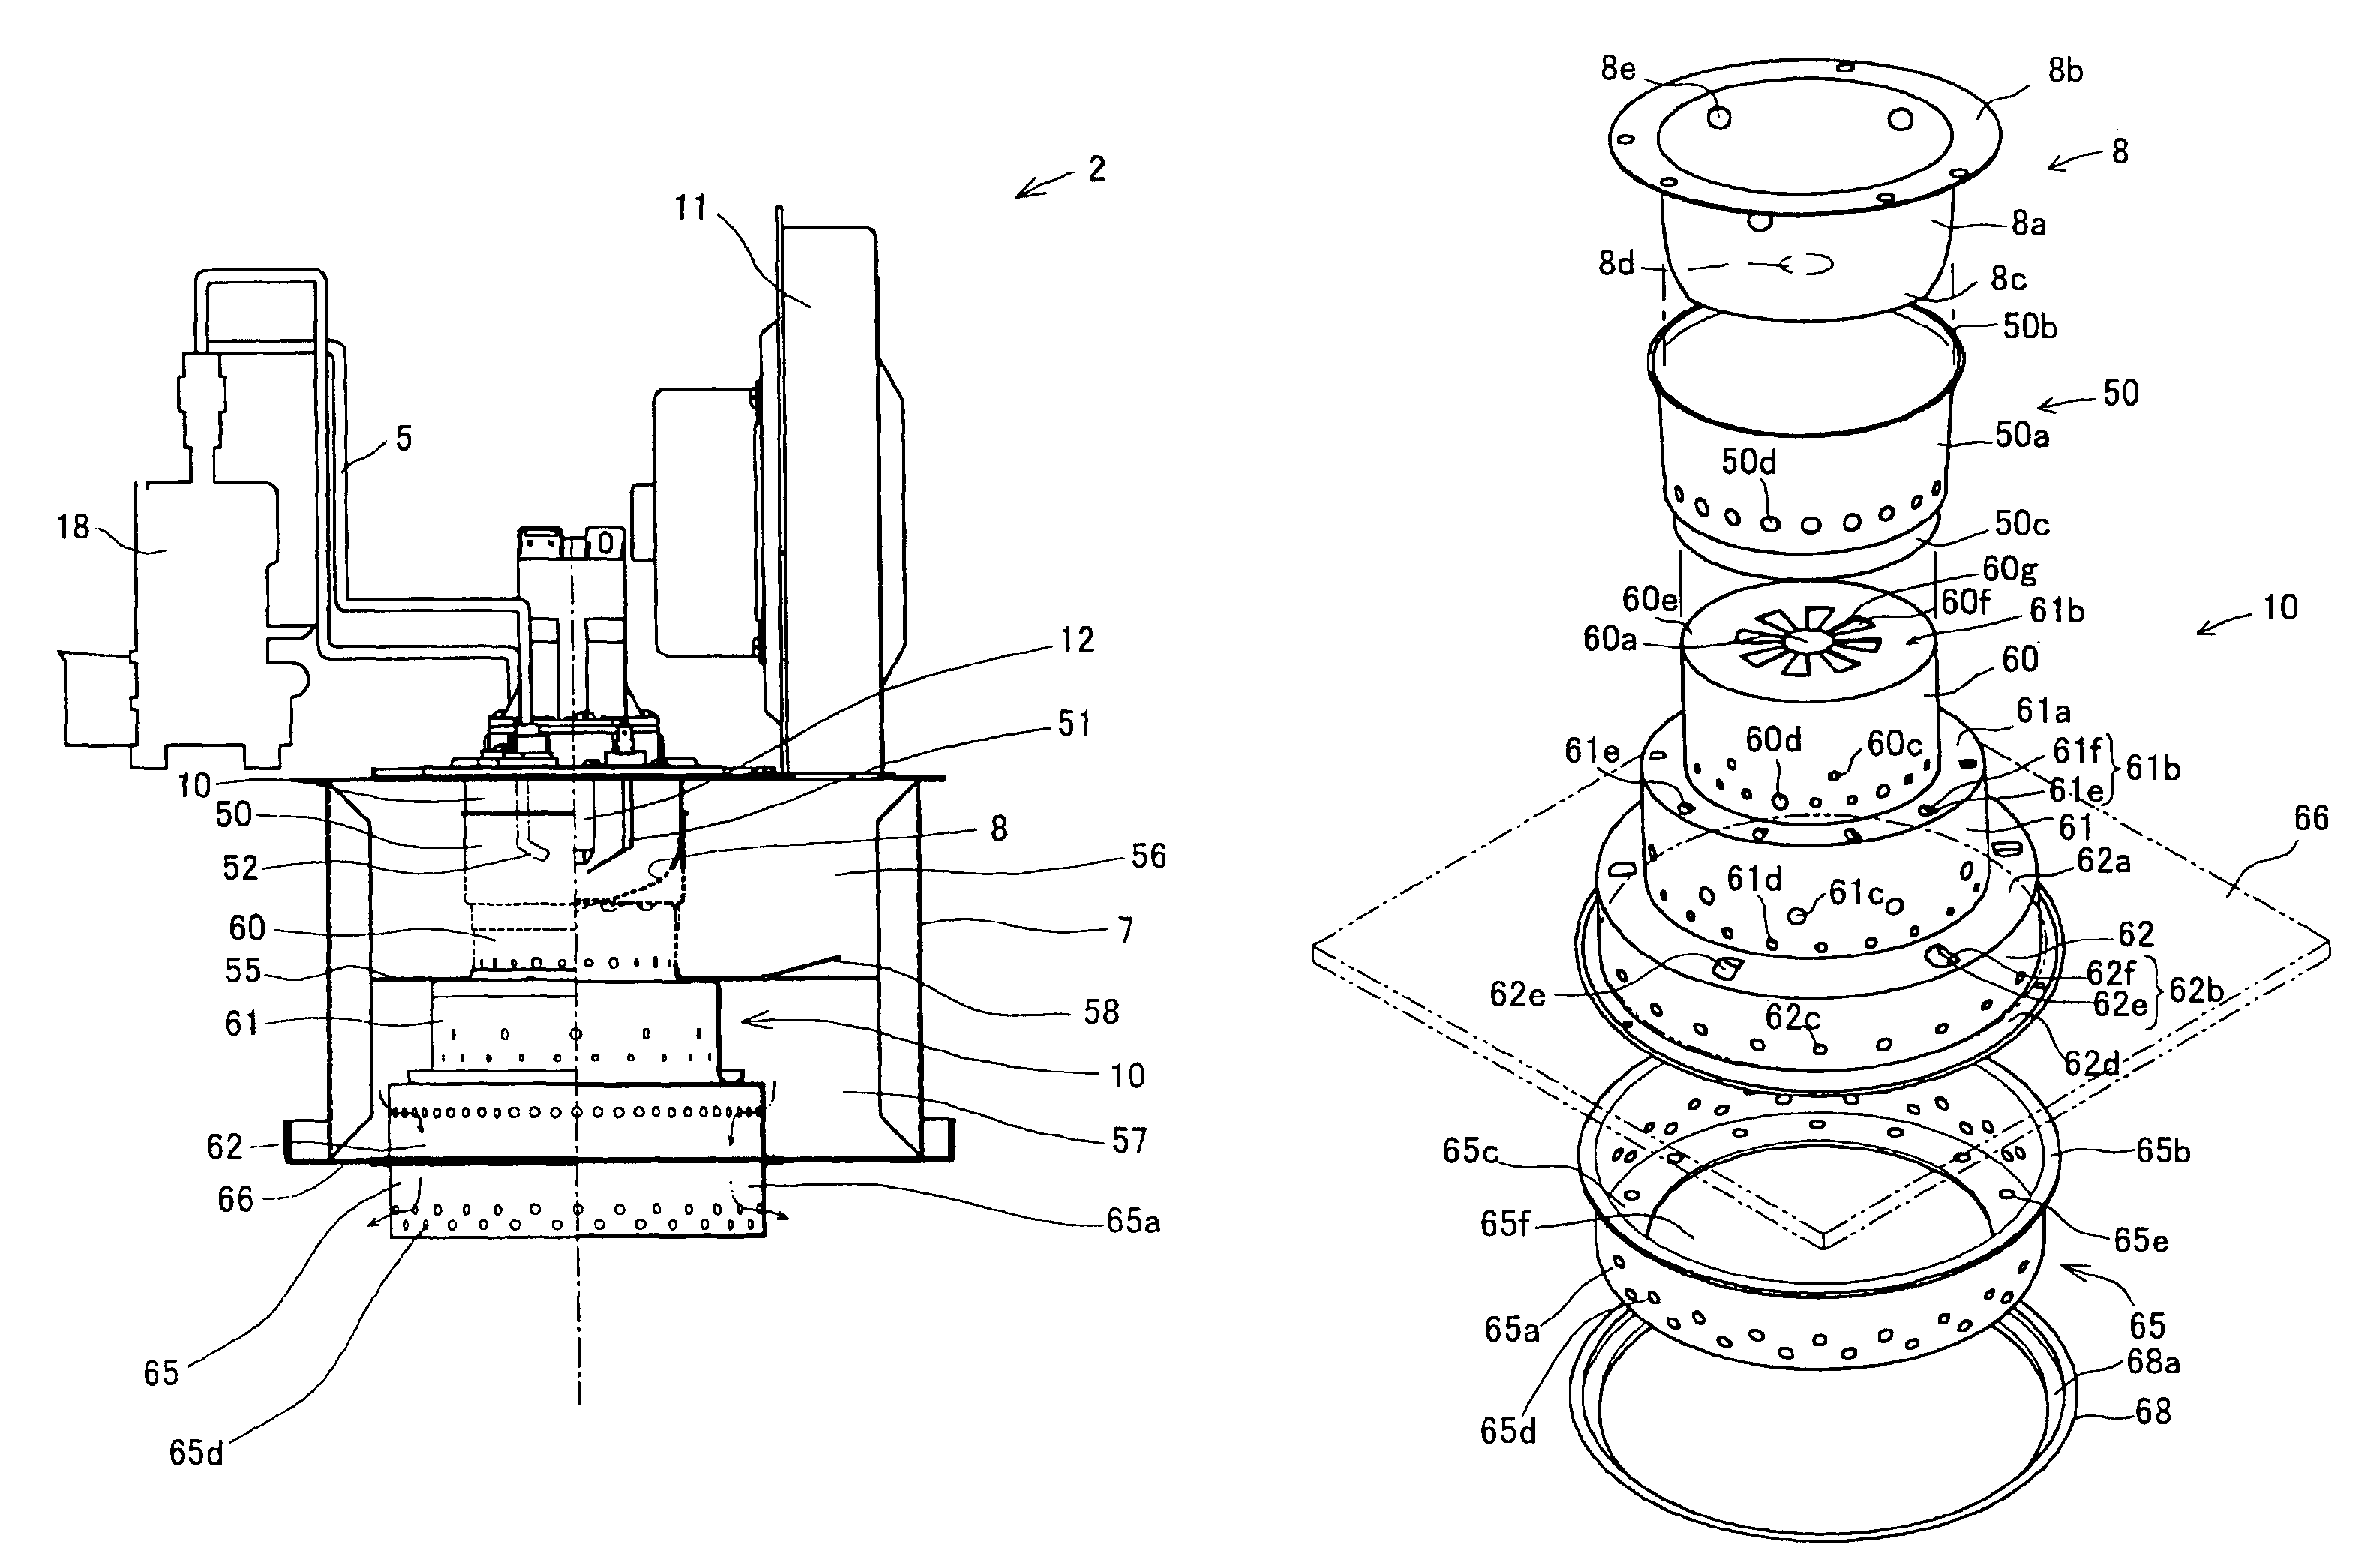 Combustion apparatus